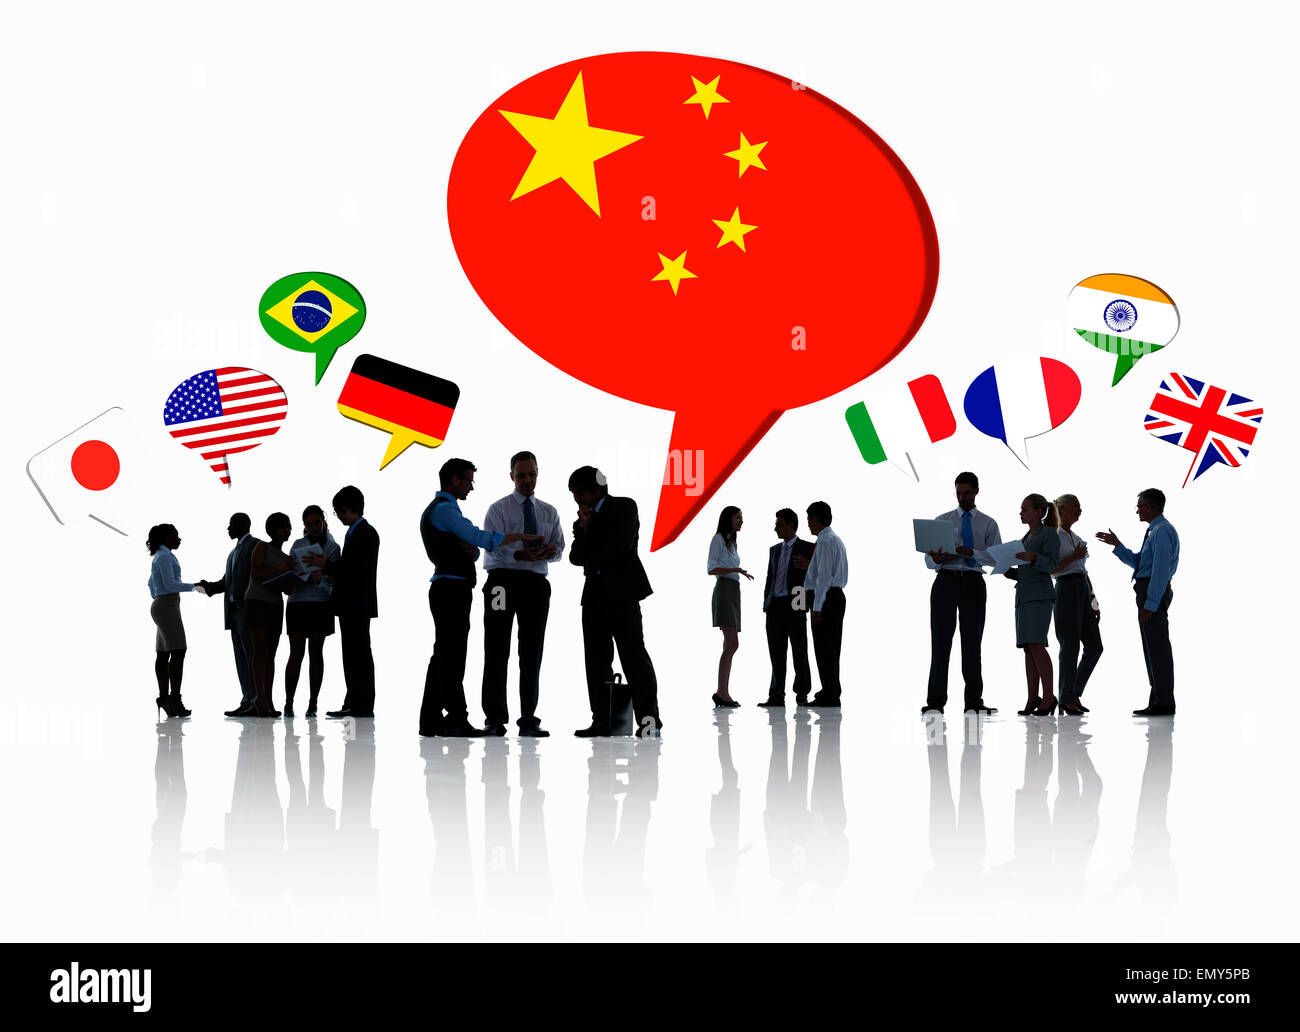 Silhouettes Of Business People Having A Discussion With Each Other And Speech Bubbles With Different National Flags Above Them. Stock Photo